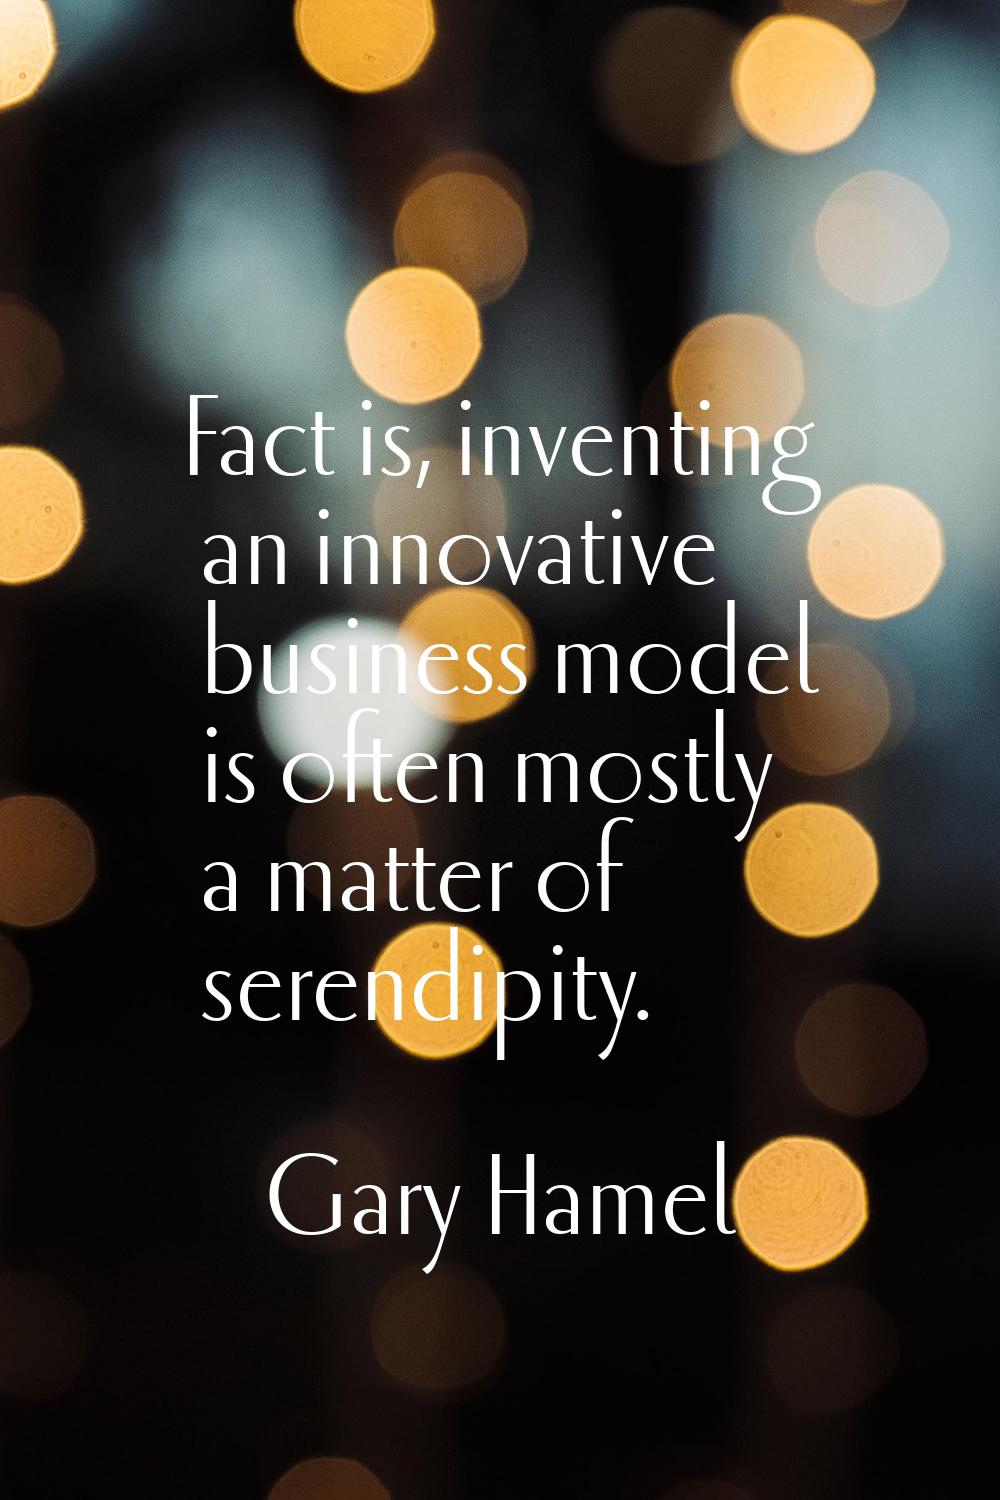 Fact is, inventing an innovative business model is often mostly a matter of serendipity.